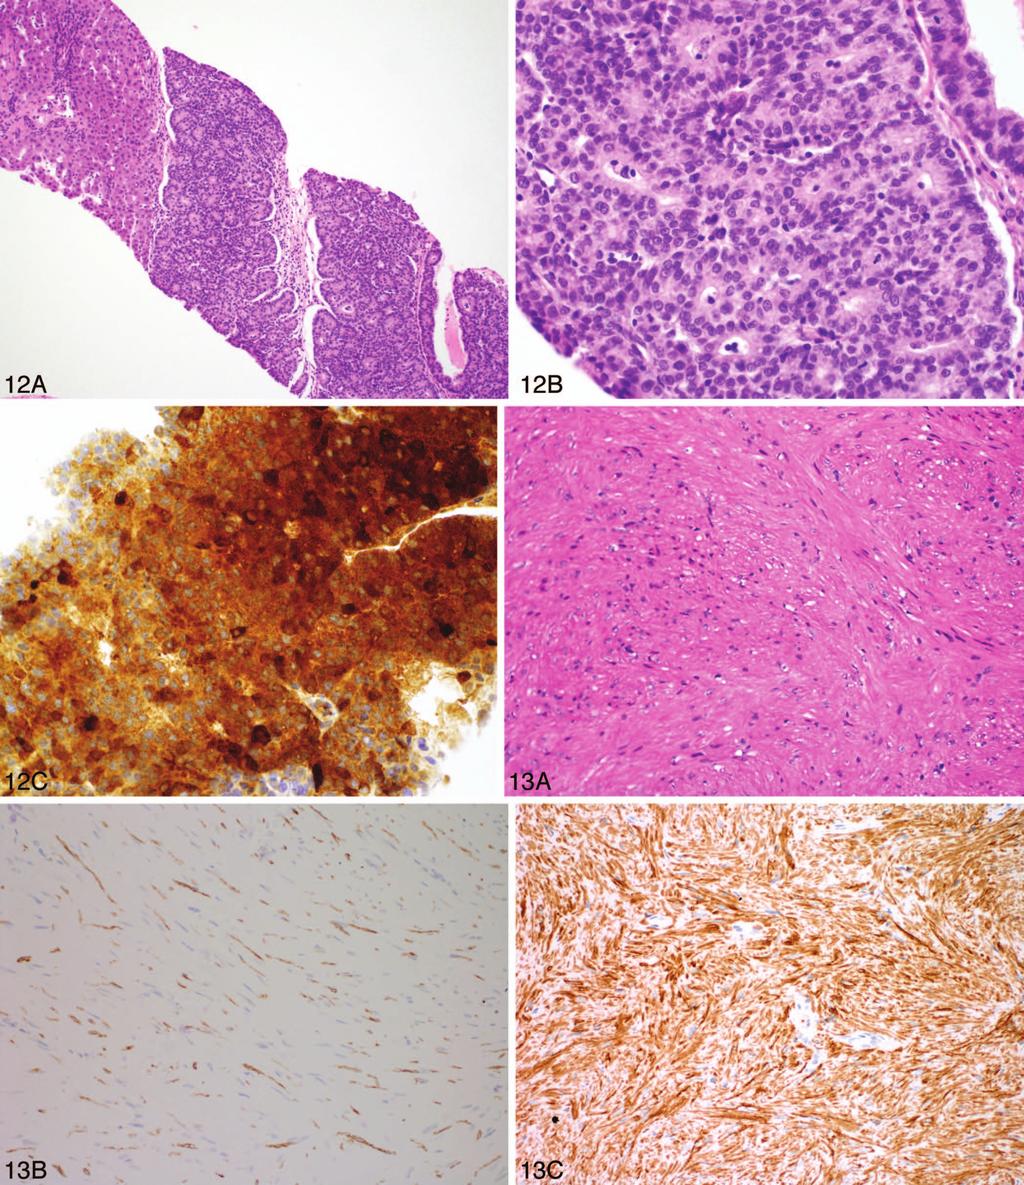 Figure 12. A liver biopsy shows an area of tumor cells with acinar formation (A). Tumor cells have round, uniform nuclei, small nucleoli, and amphophilic cytoplasm (B).